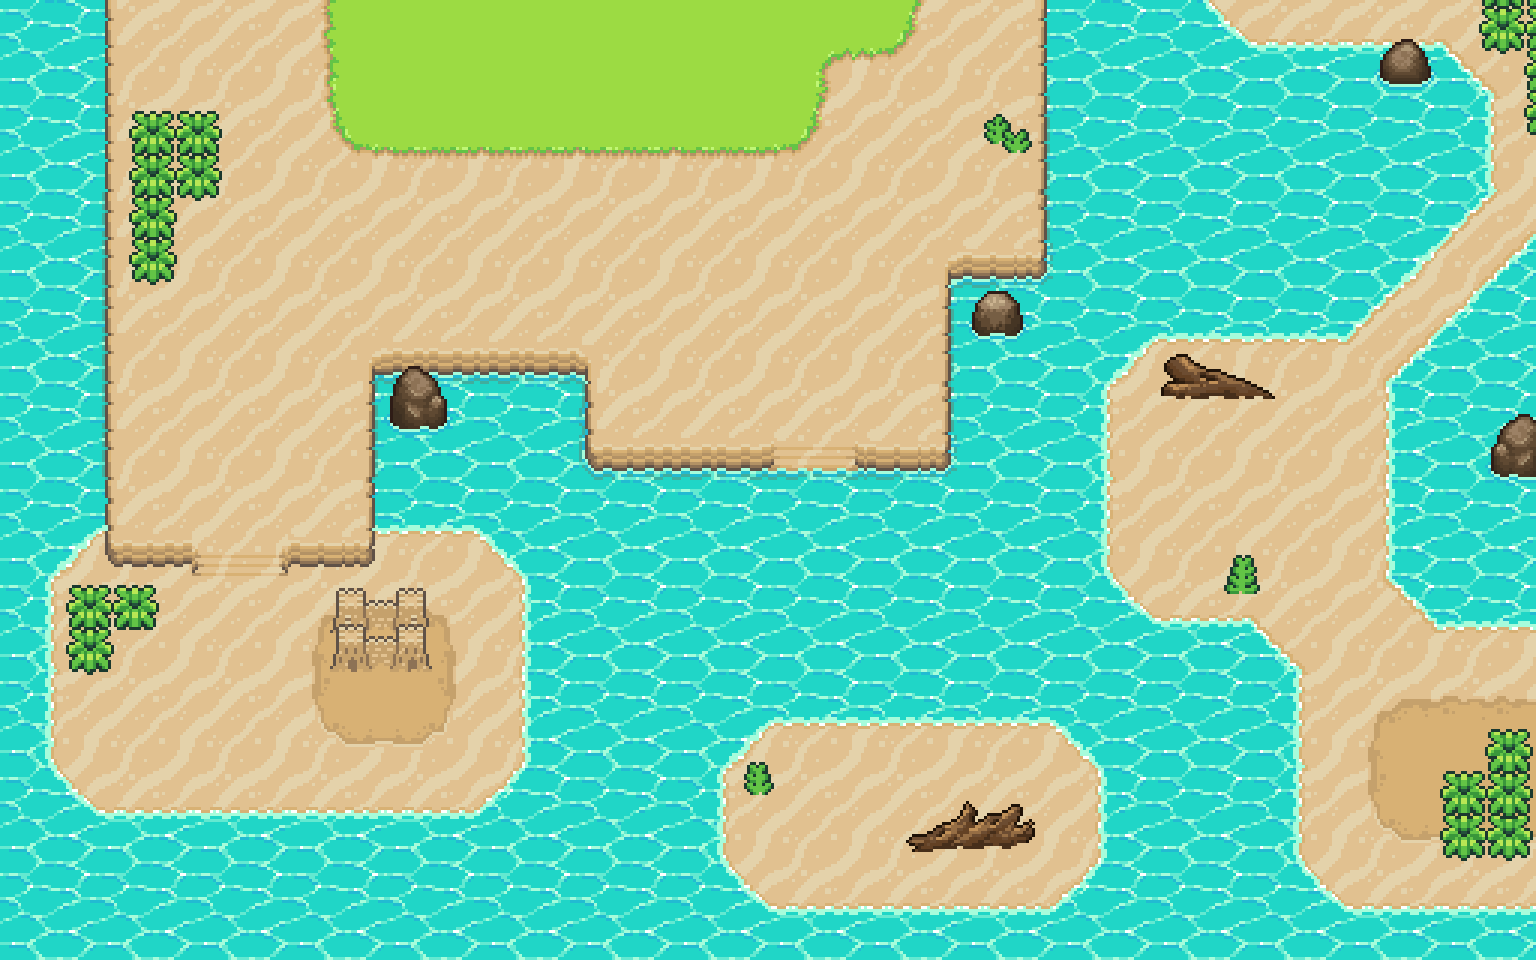 Beach Tileset and Asset Expansion Pack 32x32 Pixels